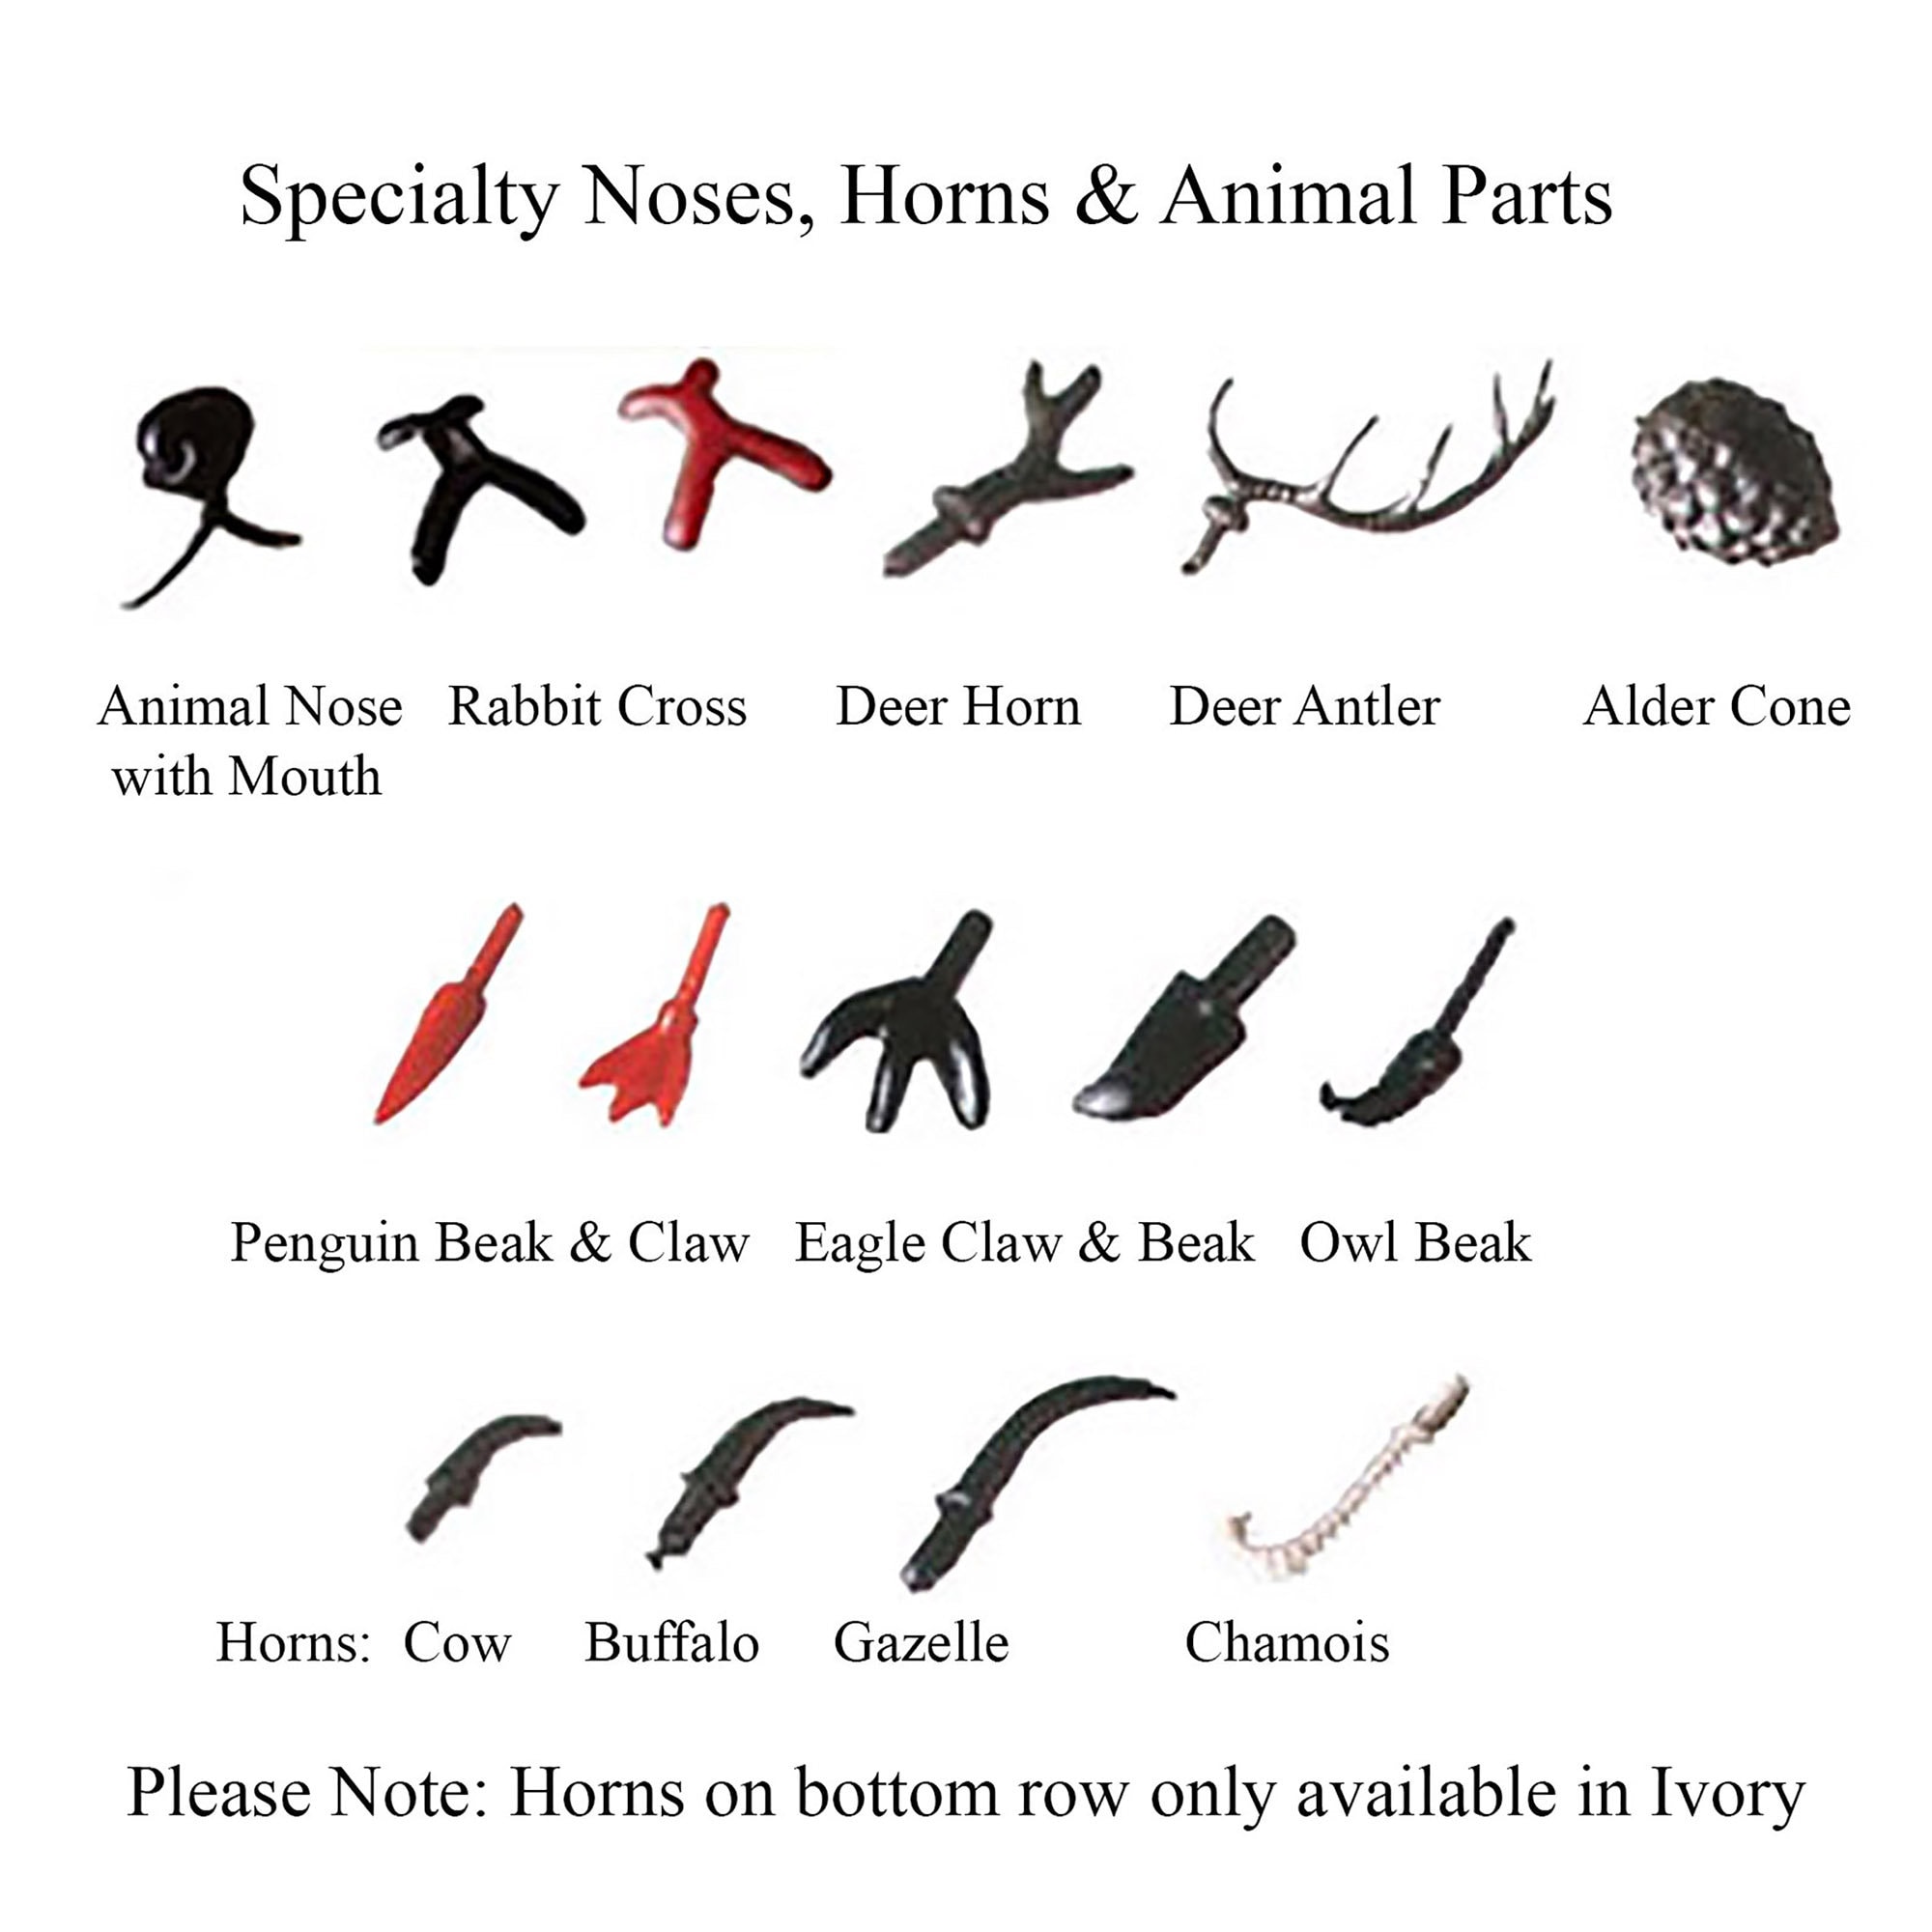 10 Pieces Specialty Noses Animal Horns Animal Parts Rabbit - Etsy